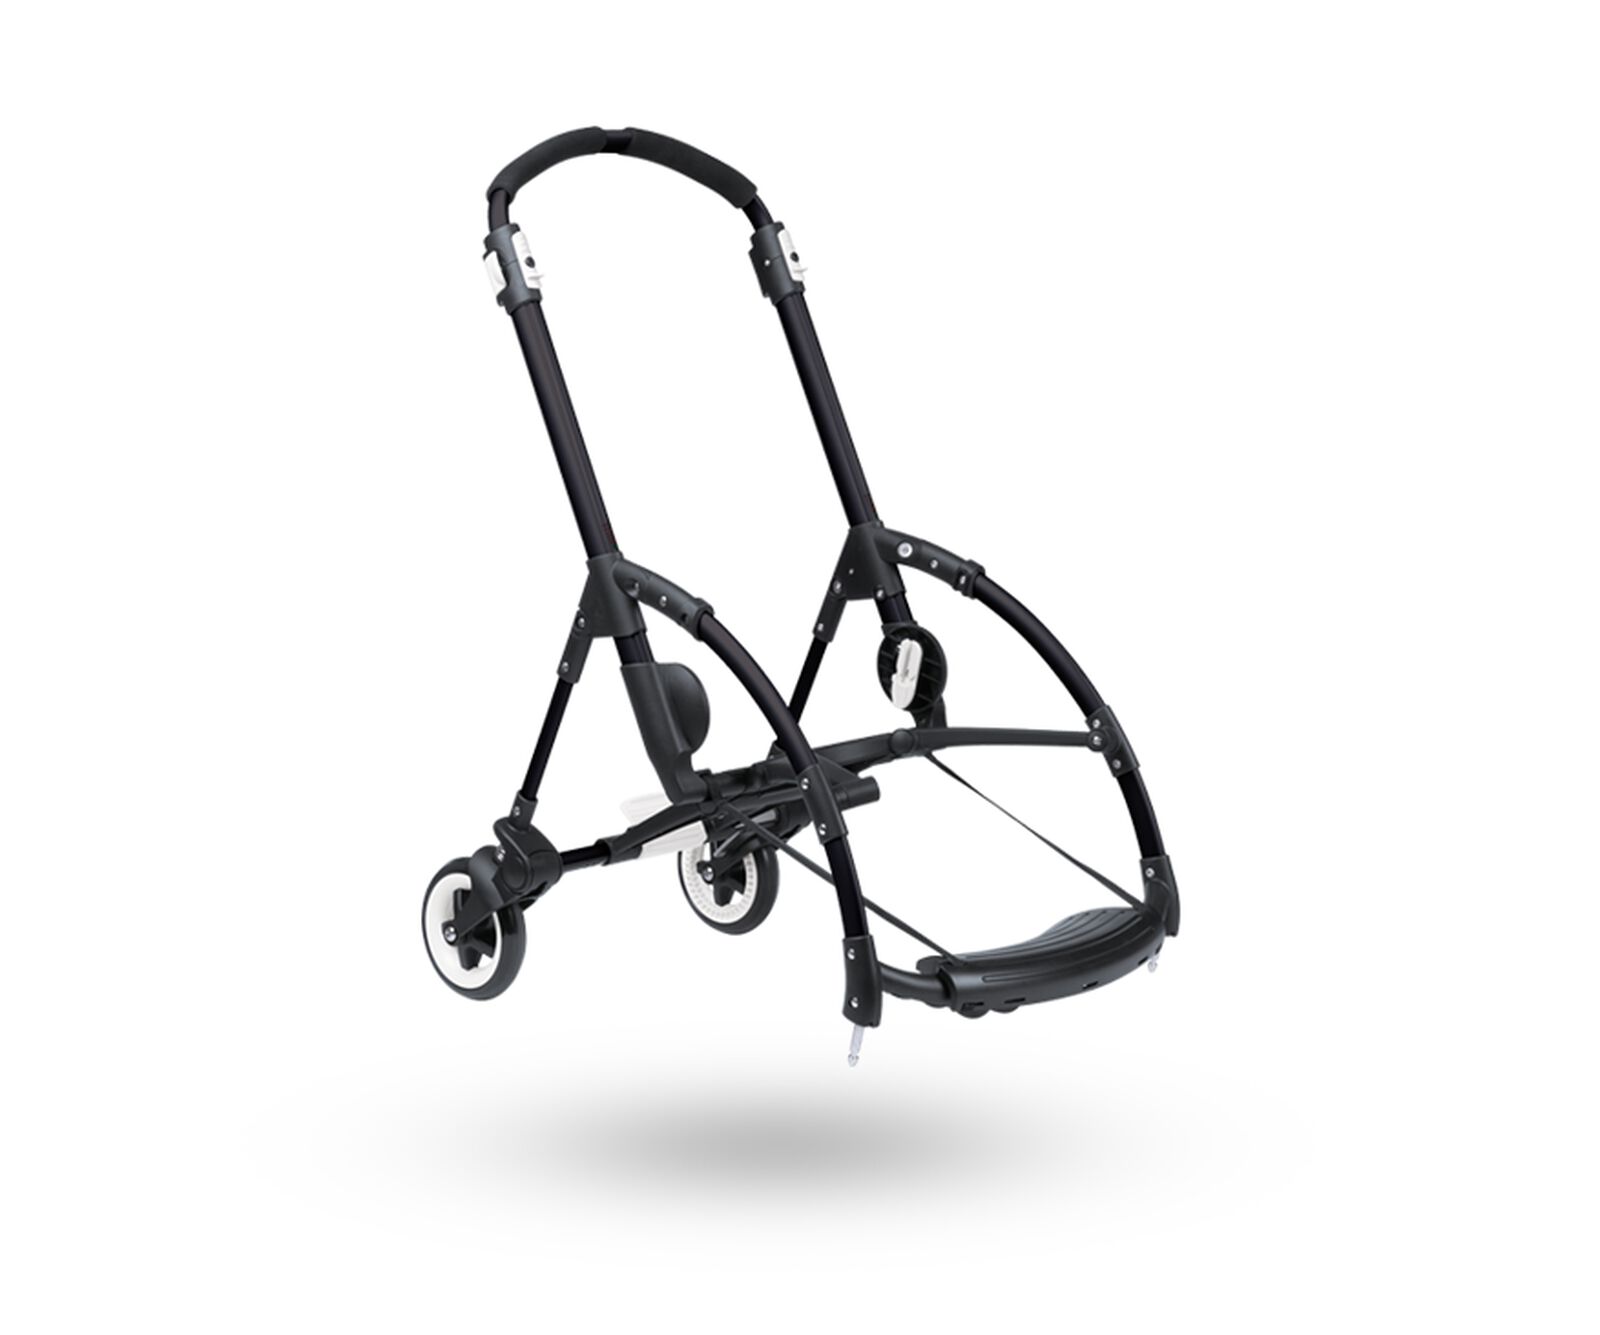 Bugaboo Bee 3 chassis